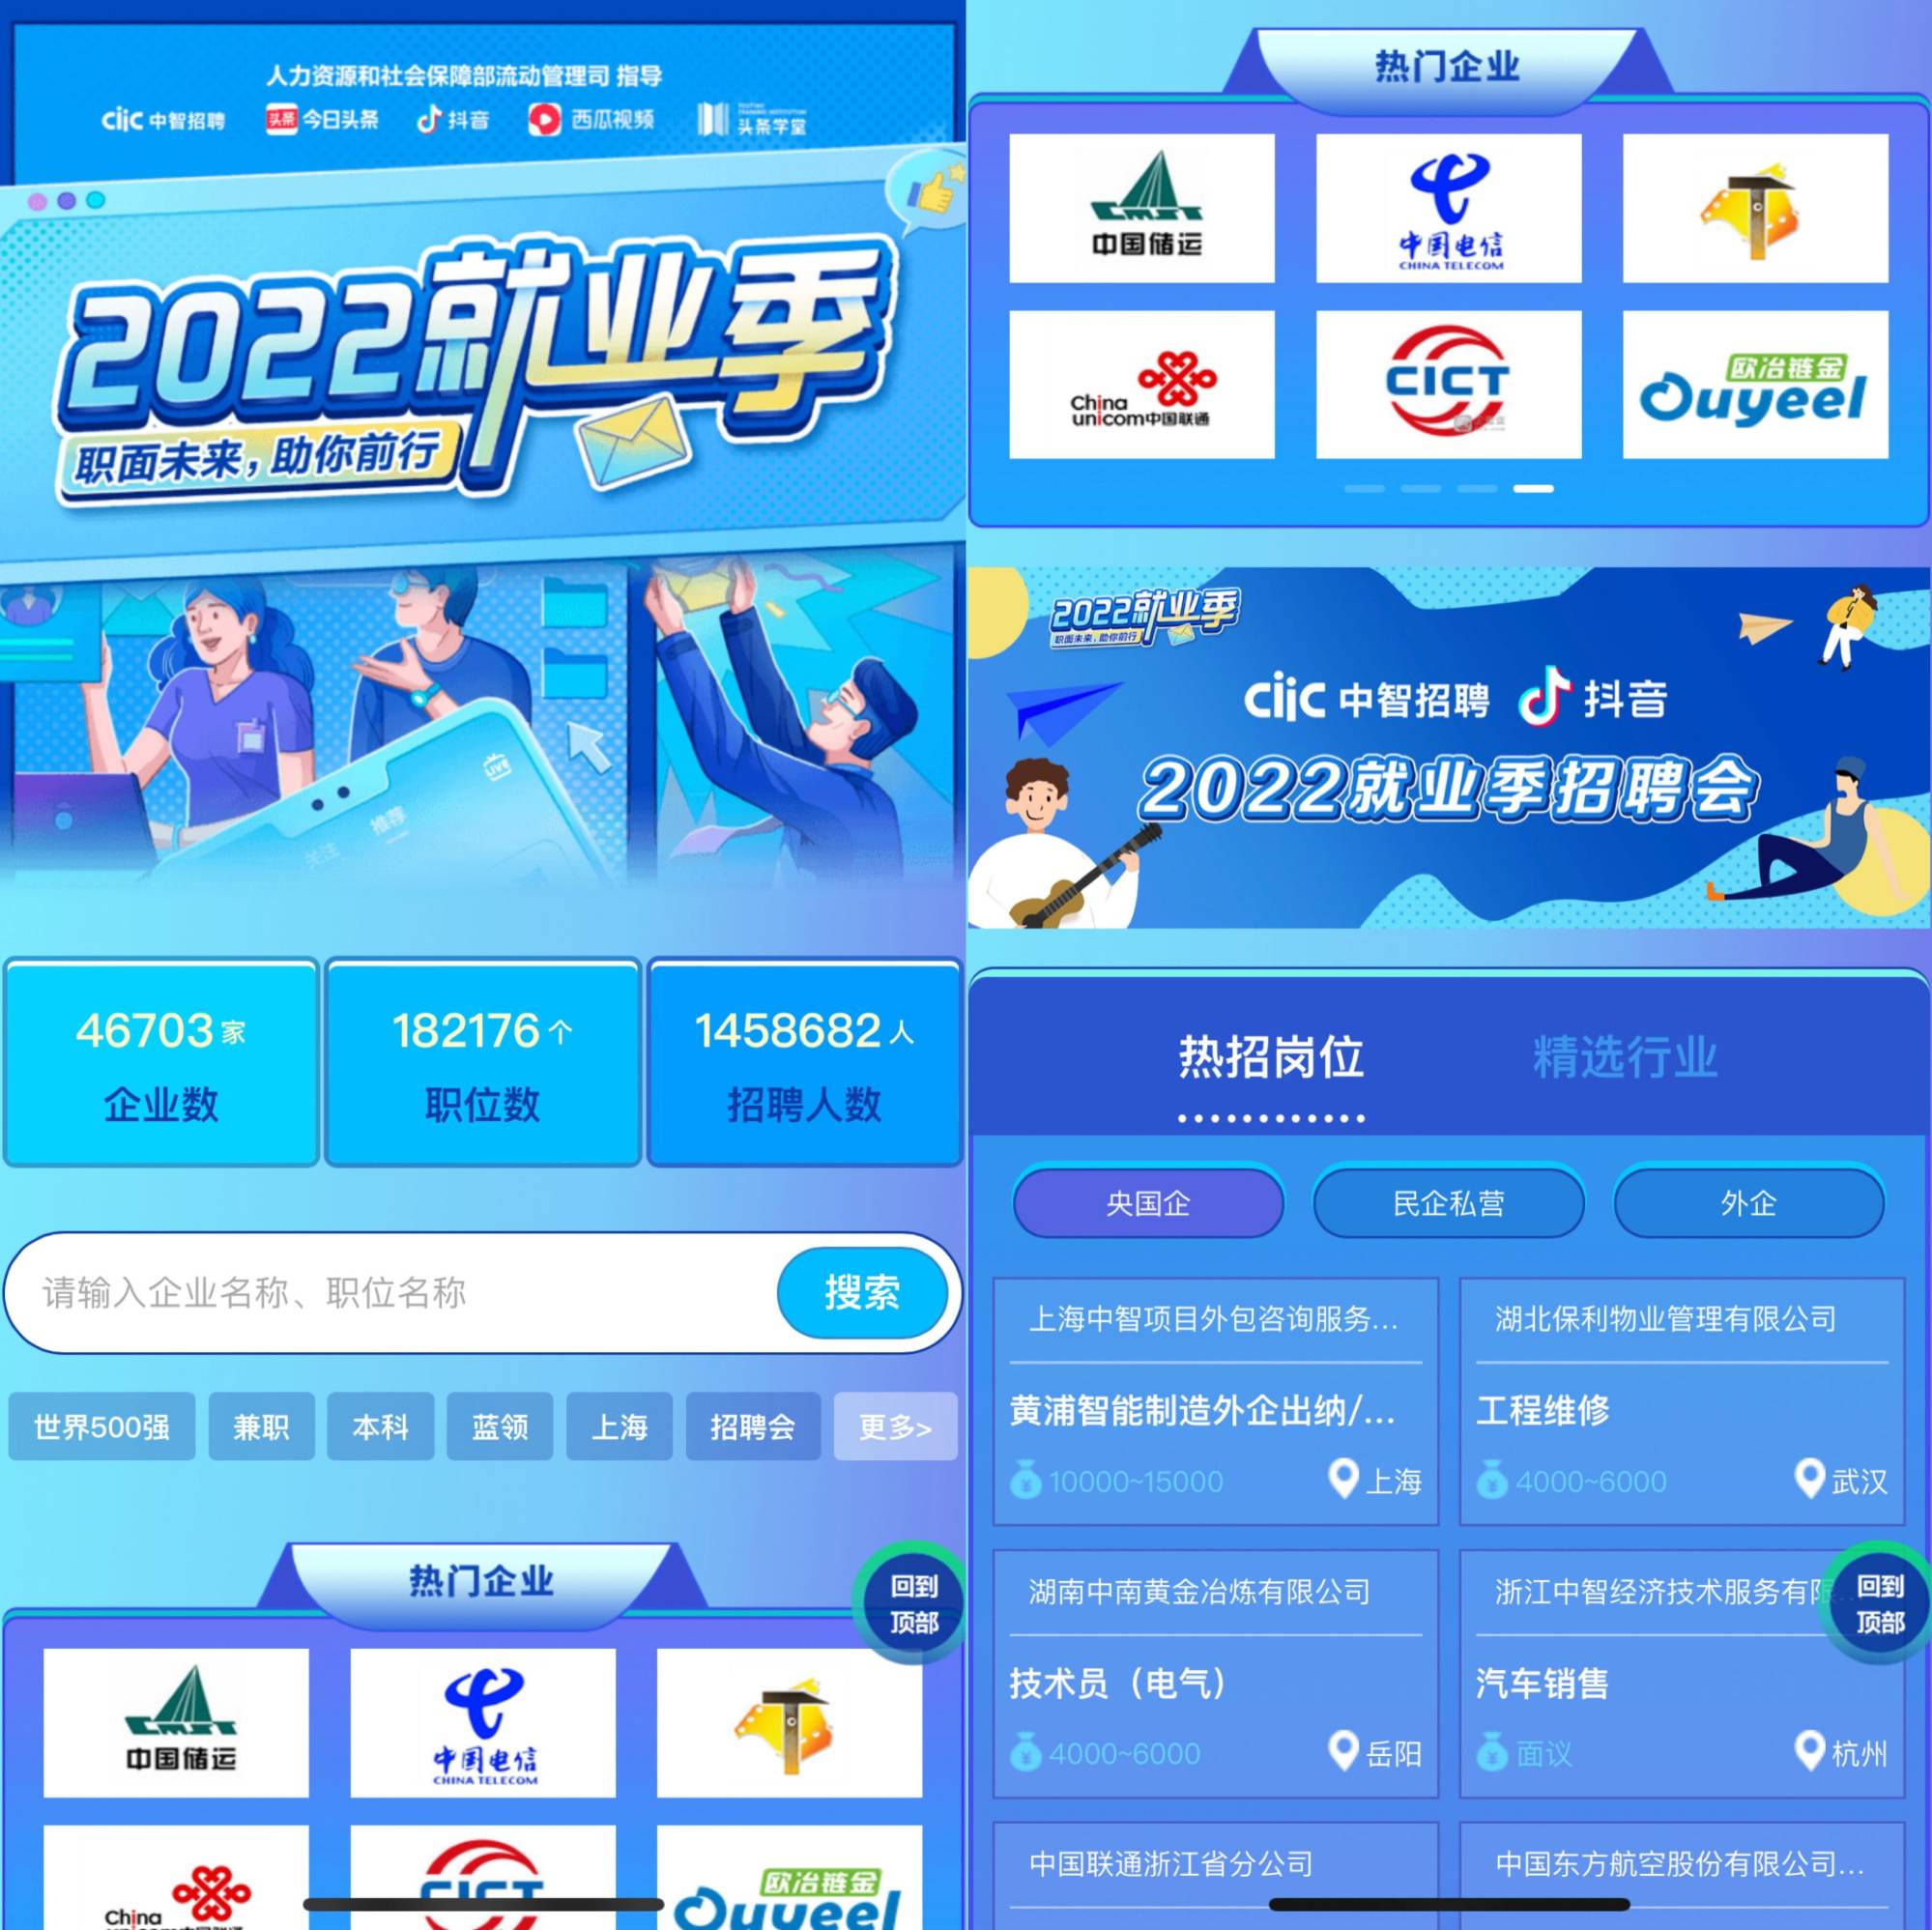 On ByteDance’s Douyin, job seekers can access more than 46,000 companies and organisations, as well as 179,000 openings. Photo: Screenshot